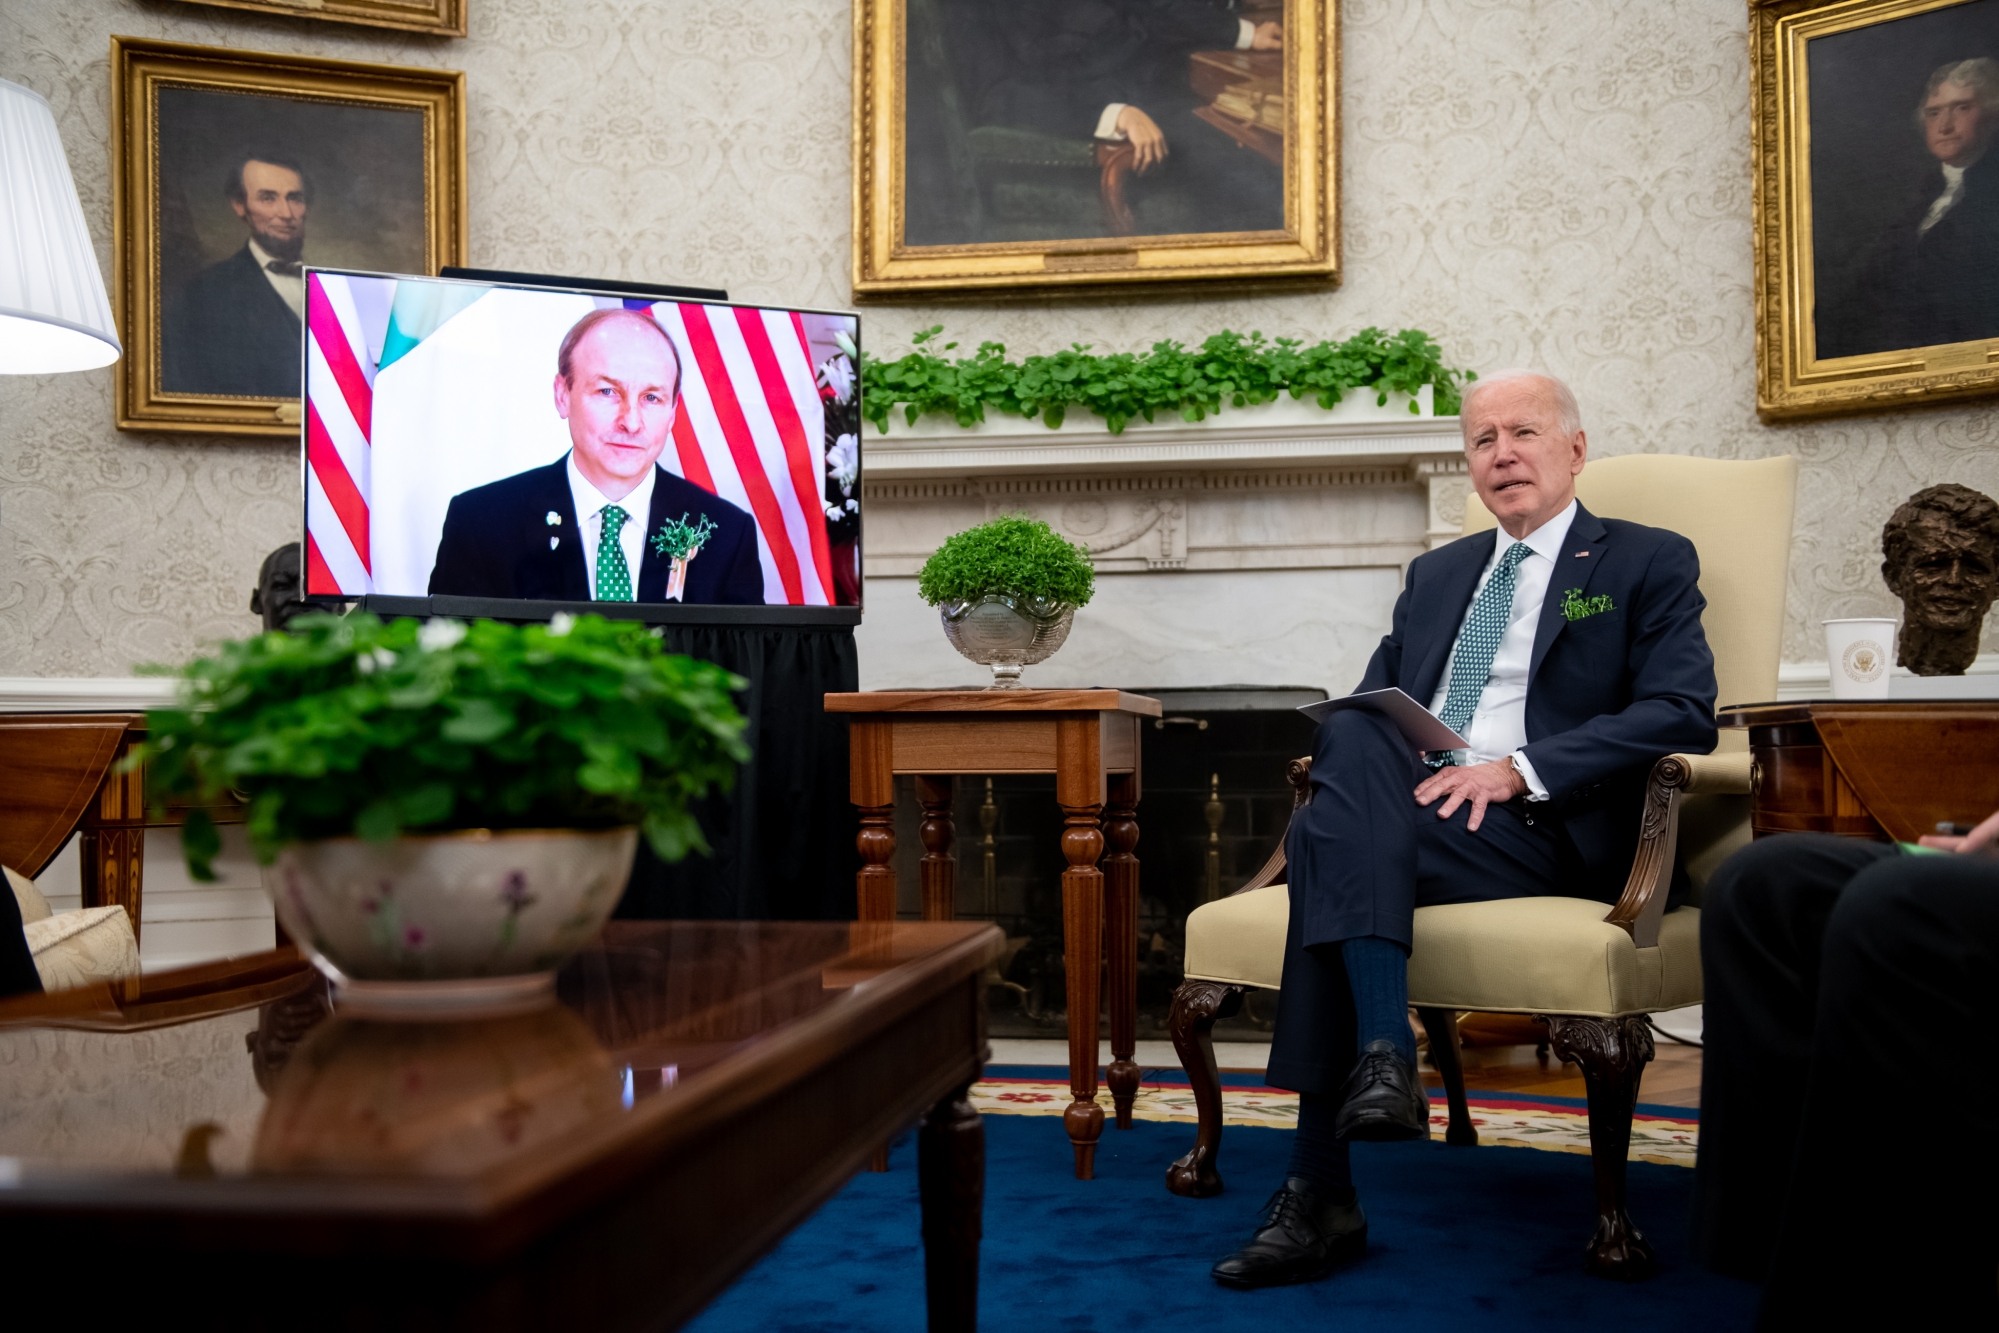 epa09080445 US President Joe Biden participates in a virtual bilateral meeting with Ireland's Prime Minister Micheal Martin in the Oval Office at the White House in Washington, DC, USA, 17 March 2021. EPA/ERIN SCOTT / POOL